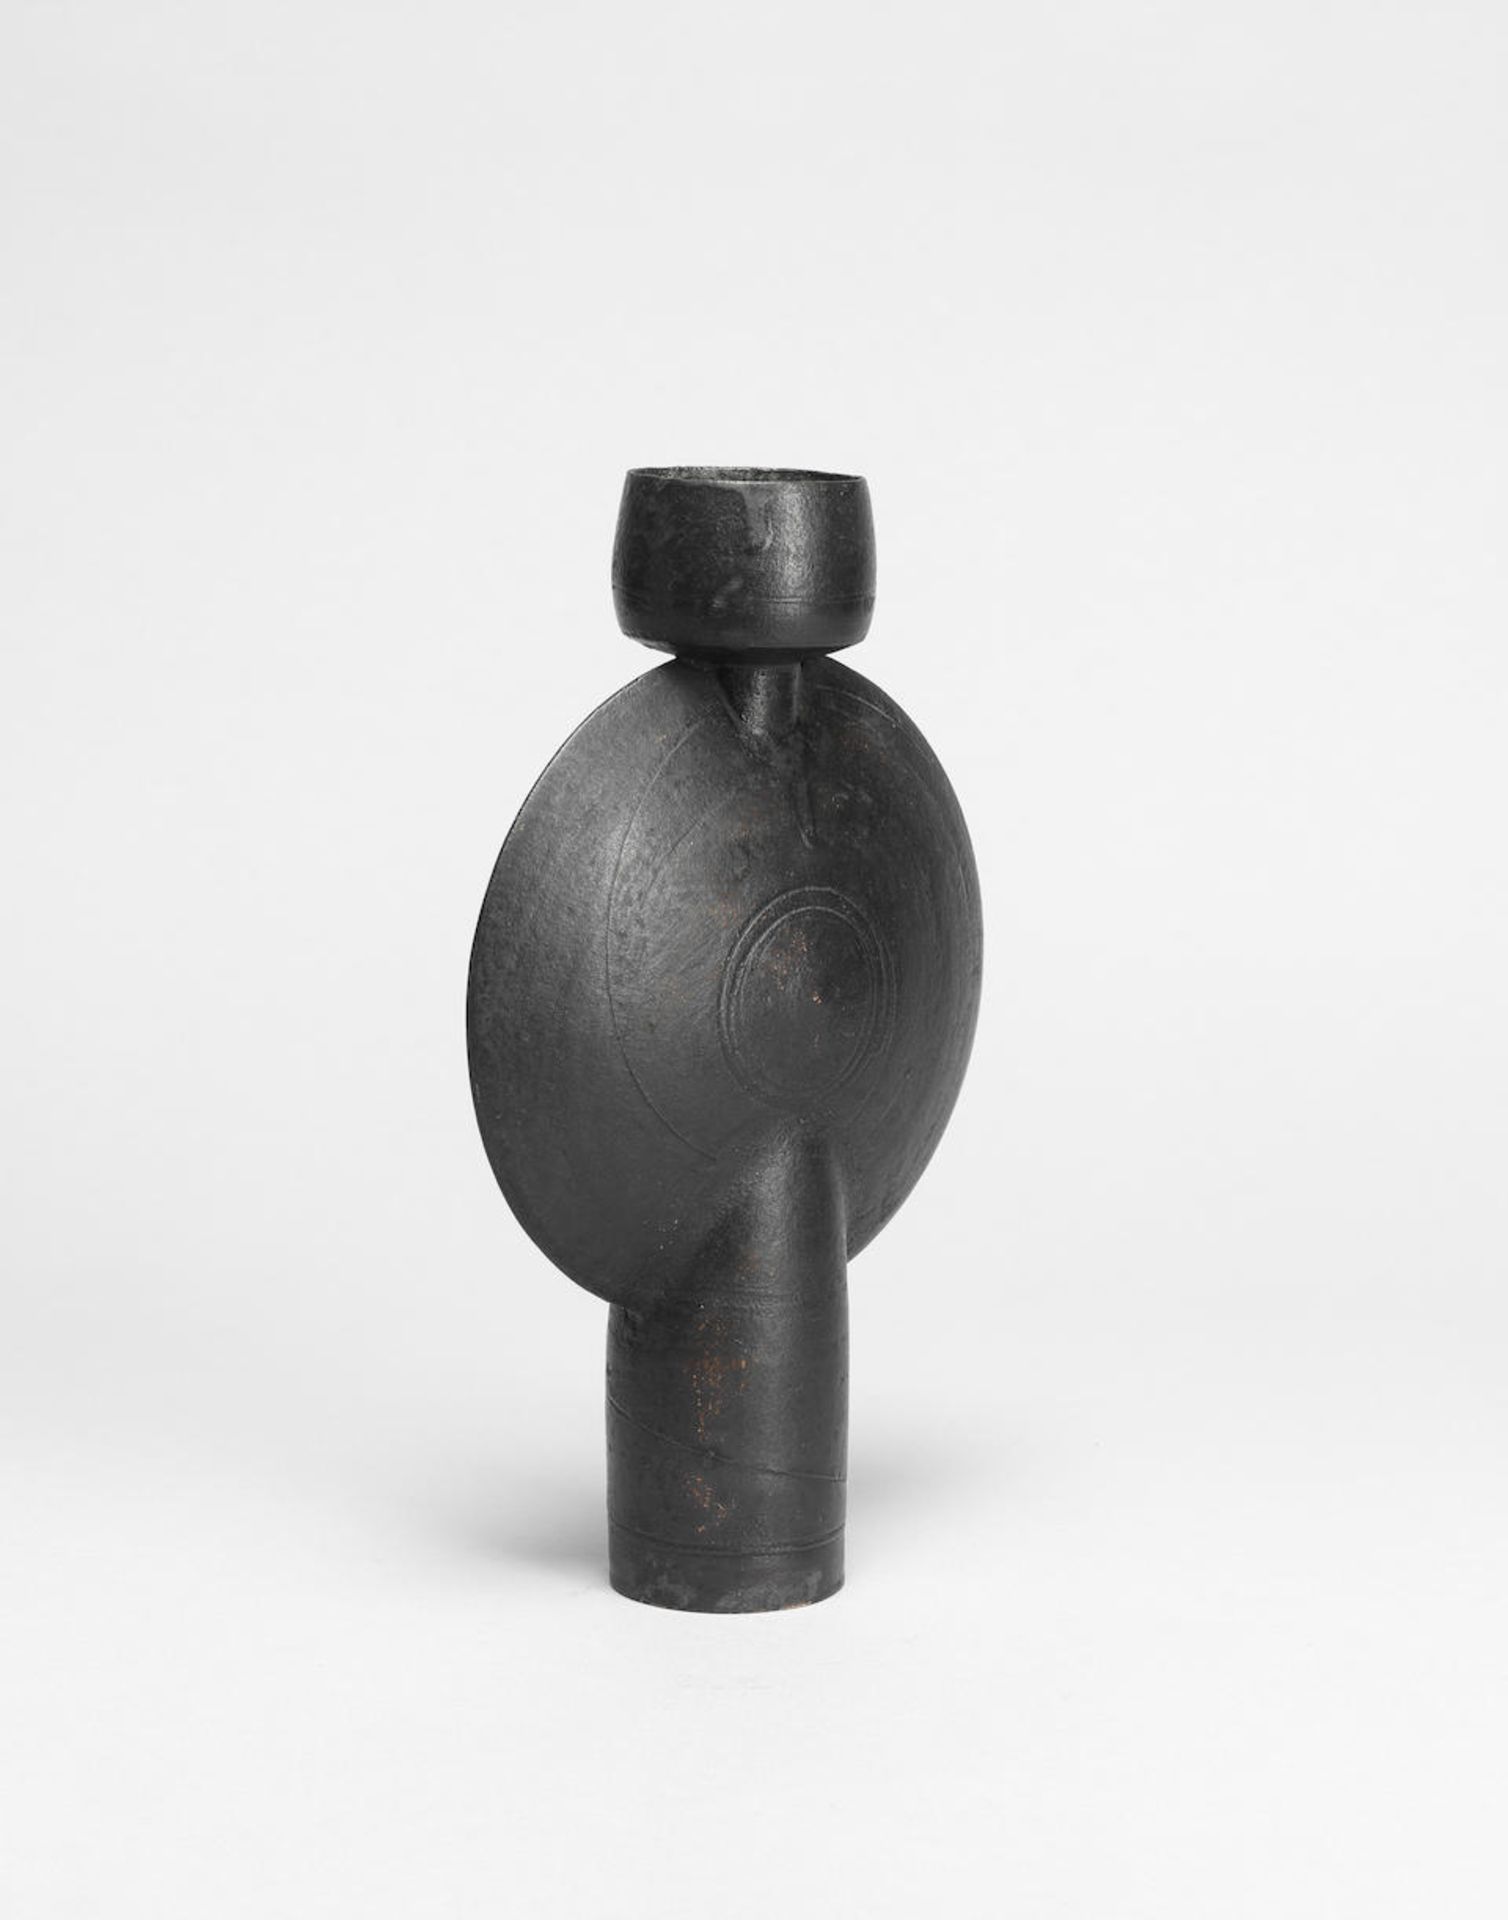 Hans Coper Composite form with central disc, circa 1967 - Image 2 of 9